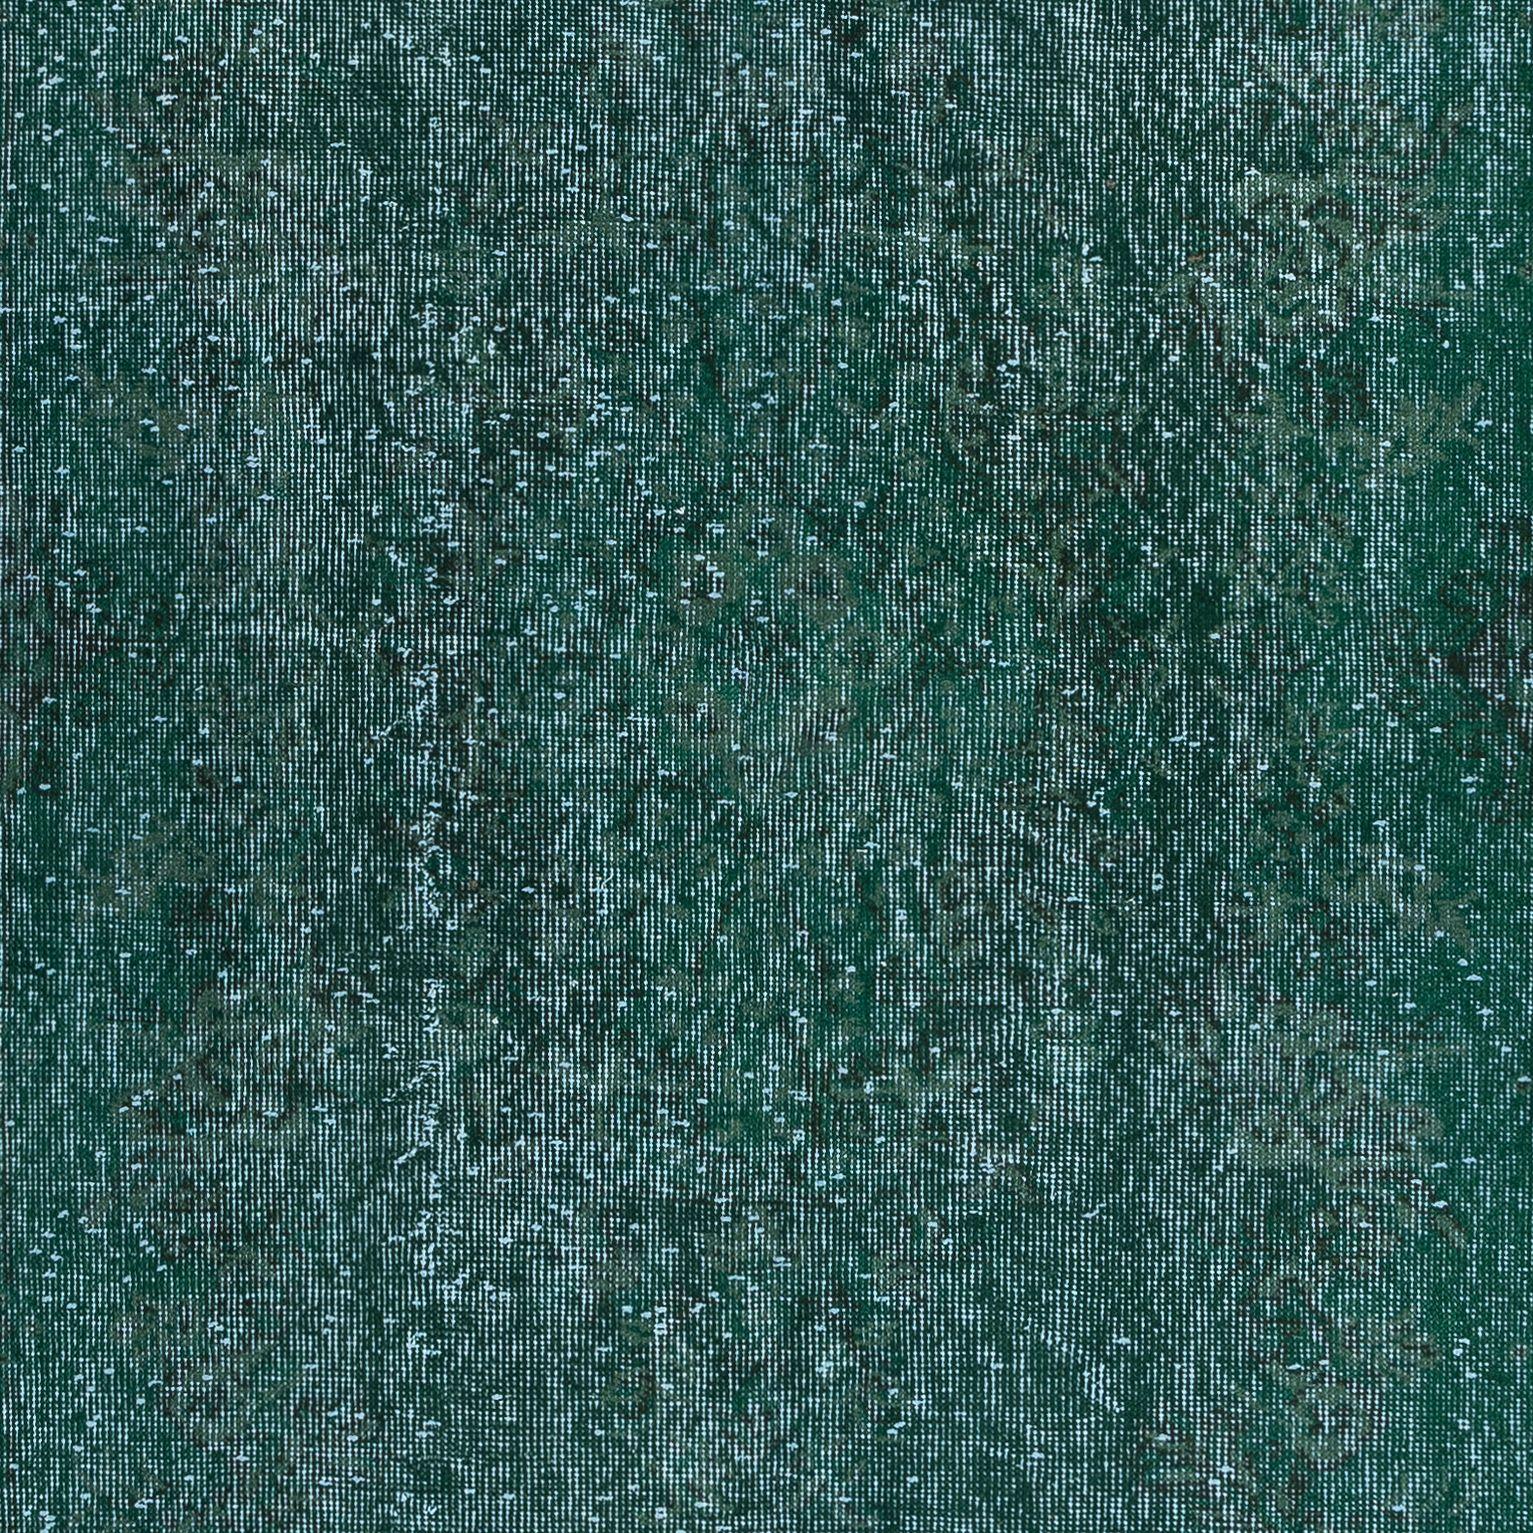 Hand-Woven 3.8x7 Ft Vintage Green Accent Rug, Handwoven and Handknotted in Turkey For Sale